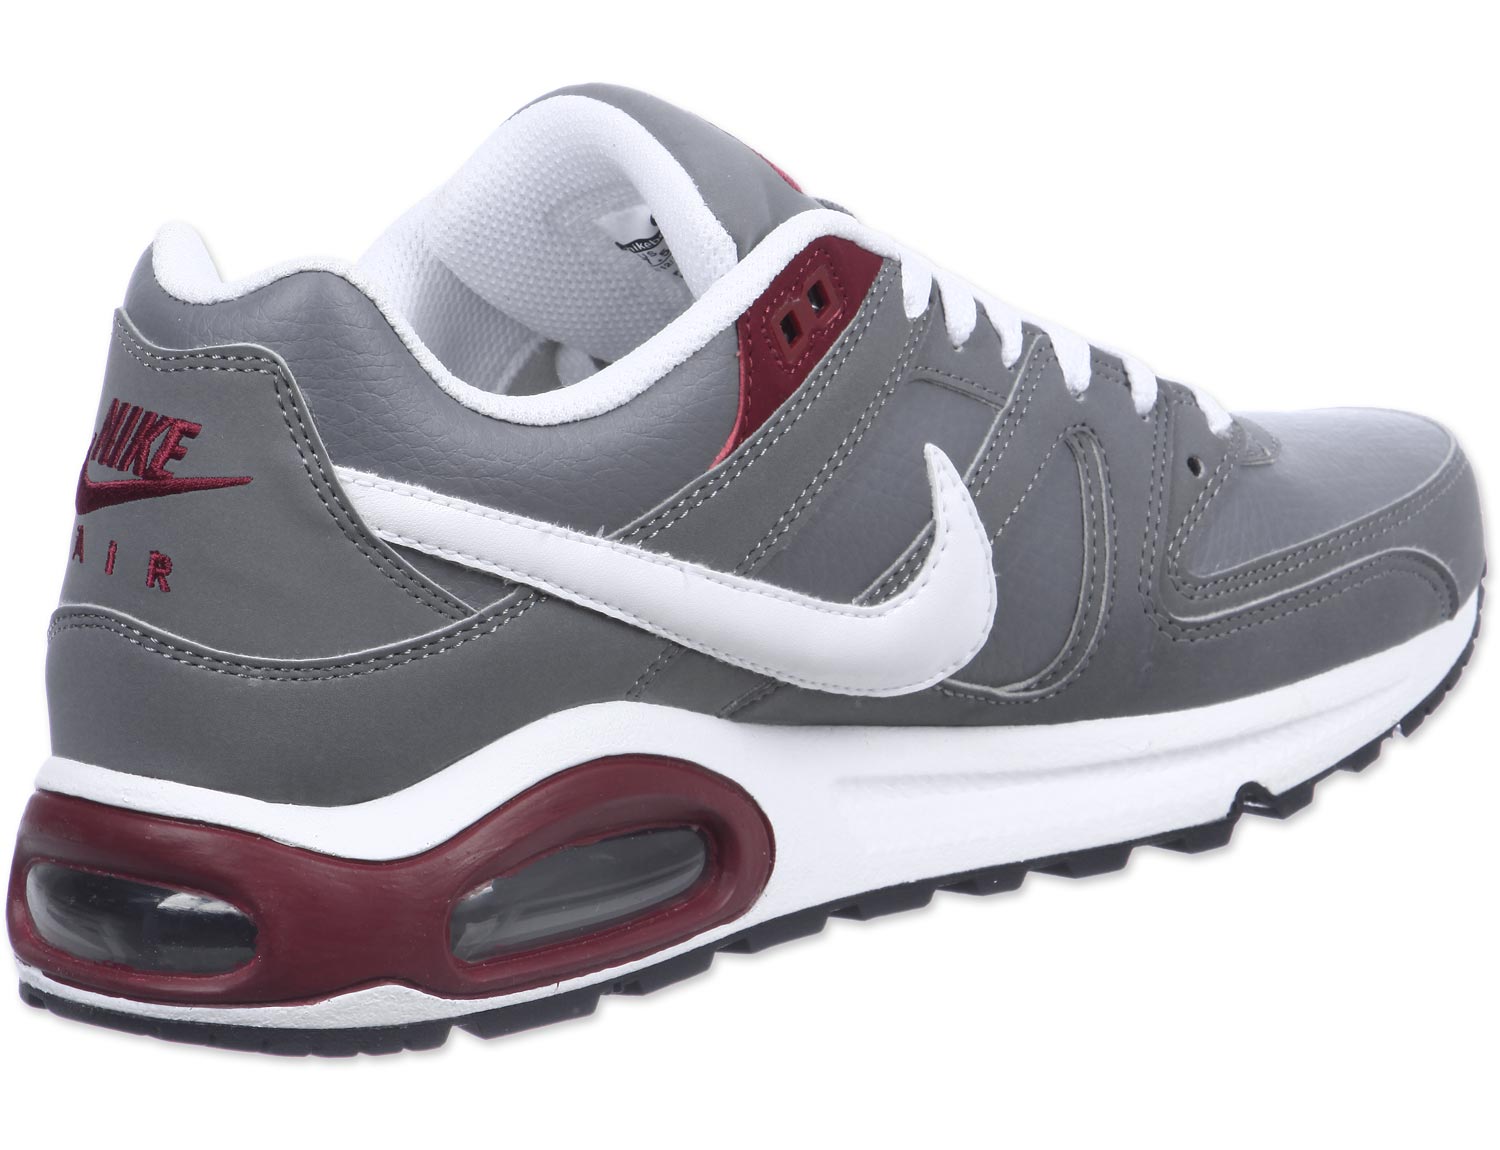 Nike Air Max Command Chaussures, Officiel Nike Air Max Command Homme Chaussures Akhapilat Offre Pas Cher2017412976